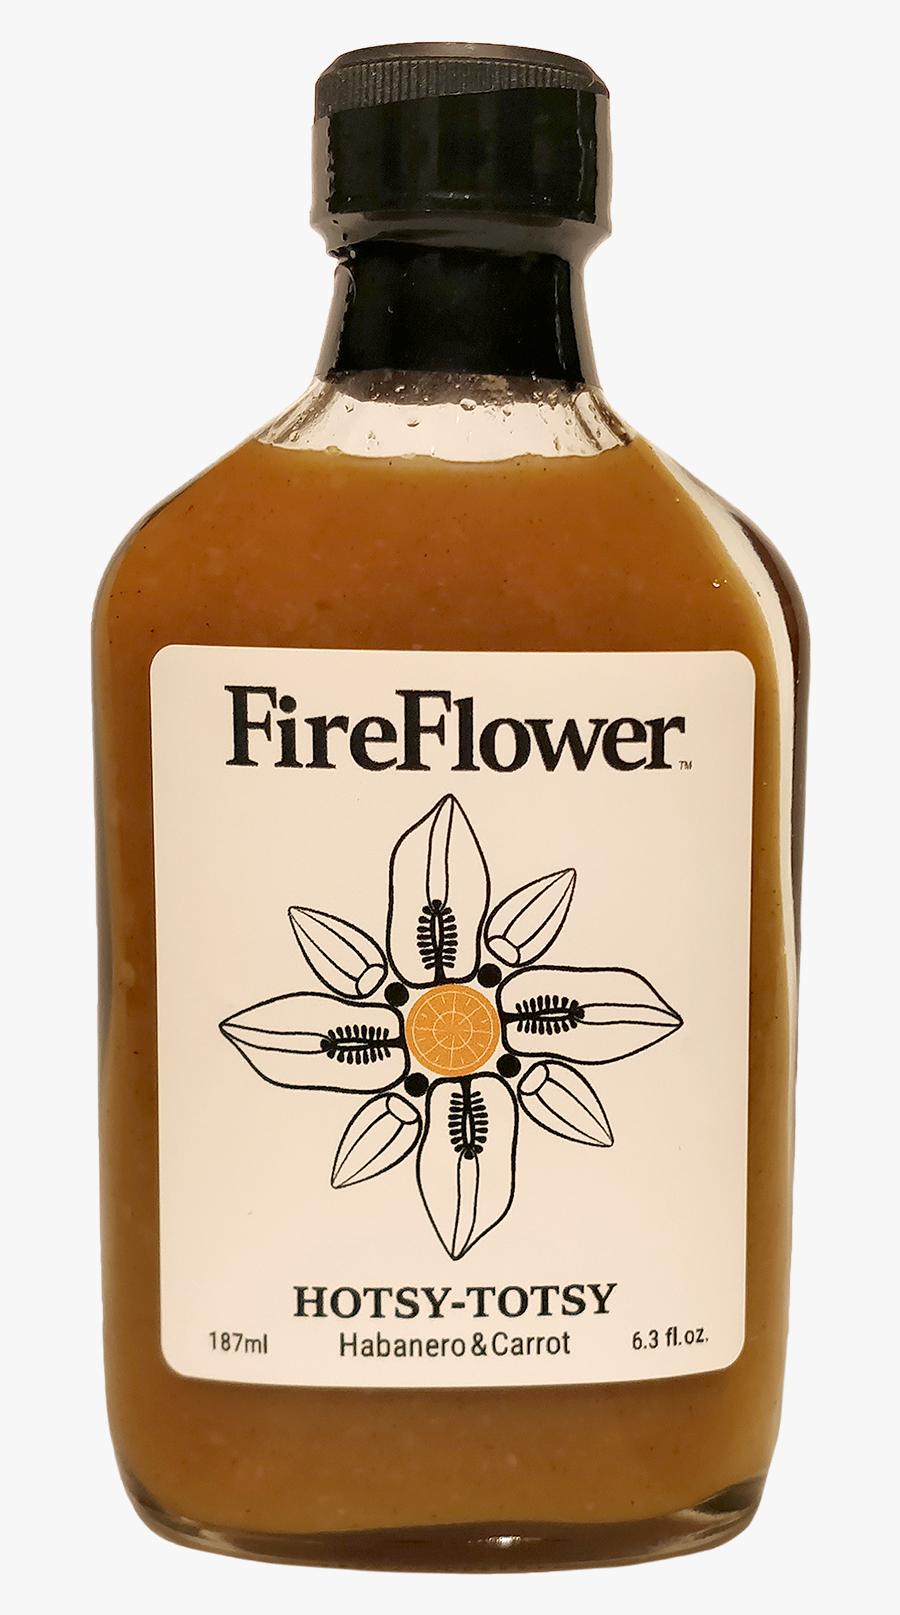 Fire Flower Png Hotsy Totsy Habanero & Carrot - Glass Bottle, Transparent Clipart